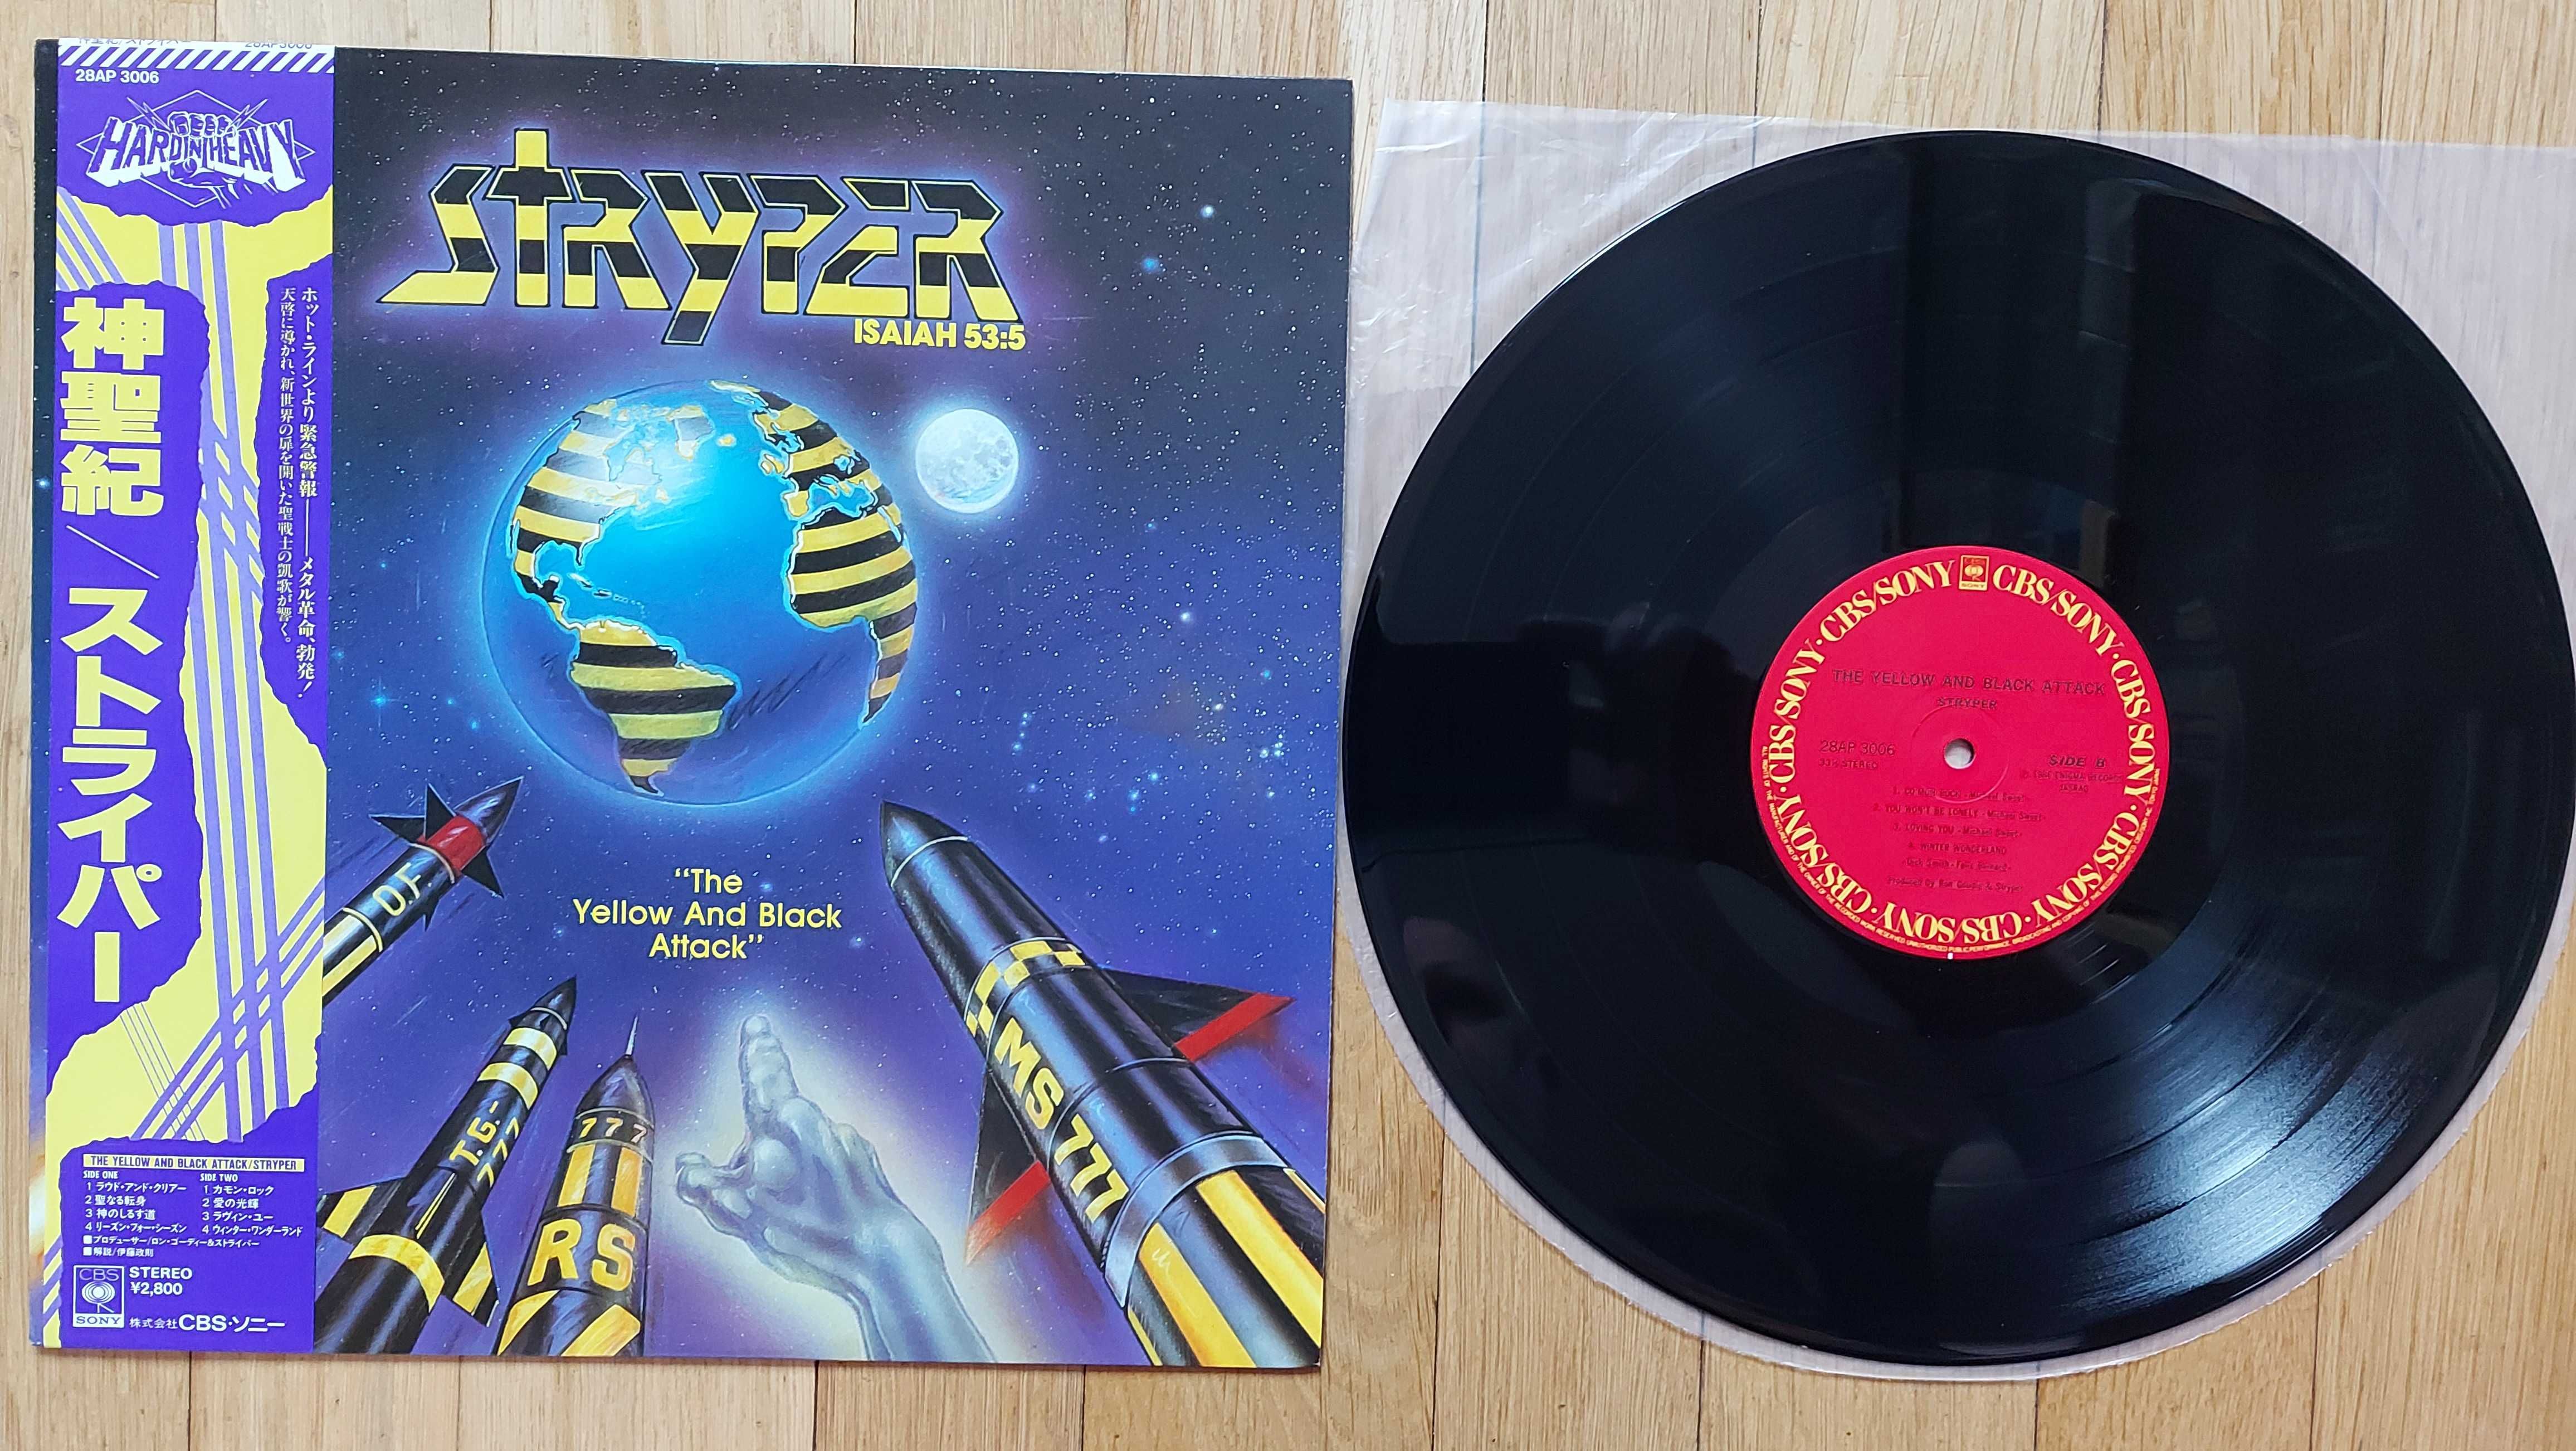 Stryper ‎The Yellow And Black Attack   21 Mar, 1985  Japan (NM/NM)